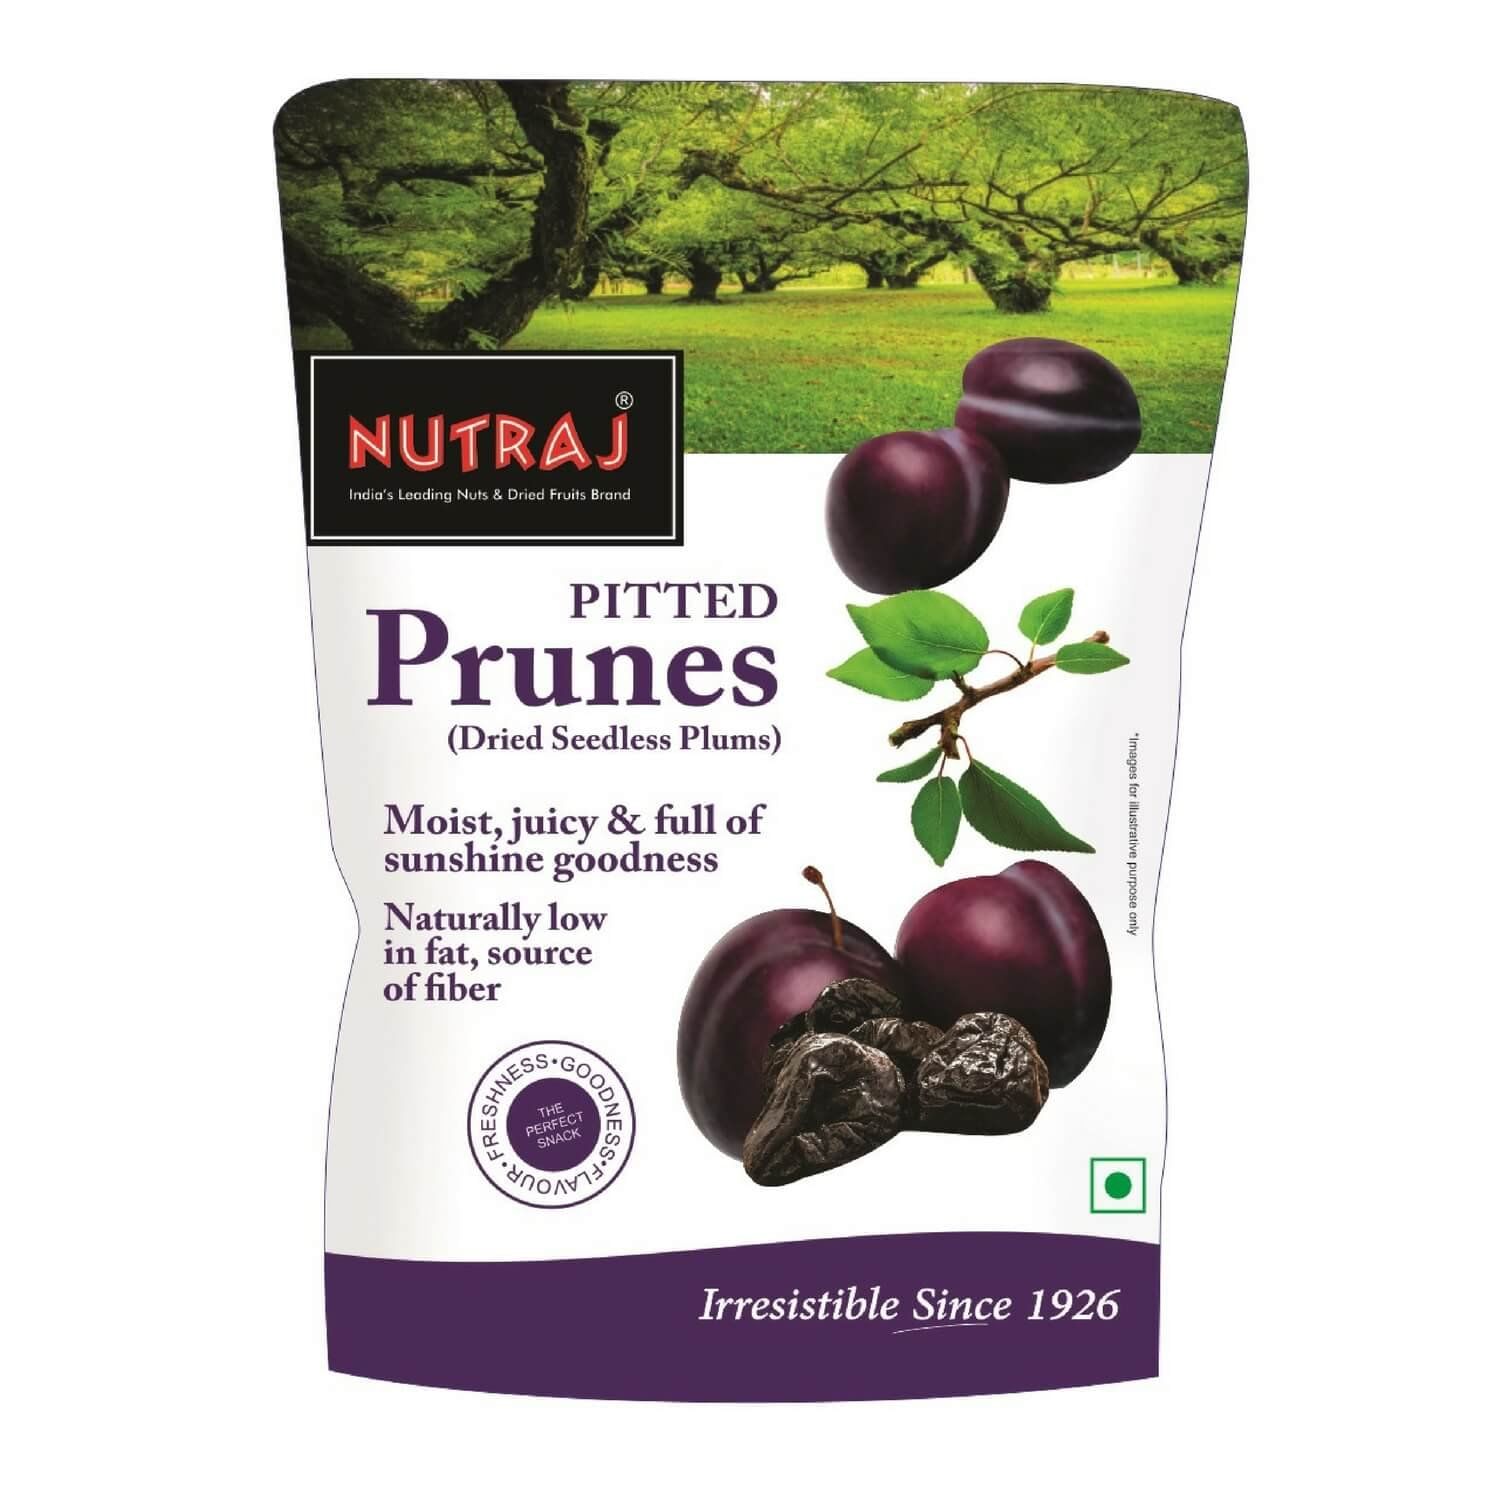 Nutraj California Pitted Prunes (Dried Seedless Plums) 800g (4 X 200g)